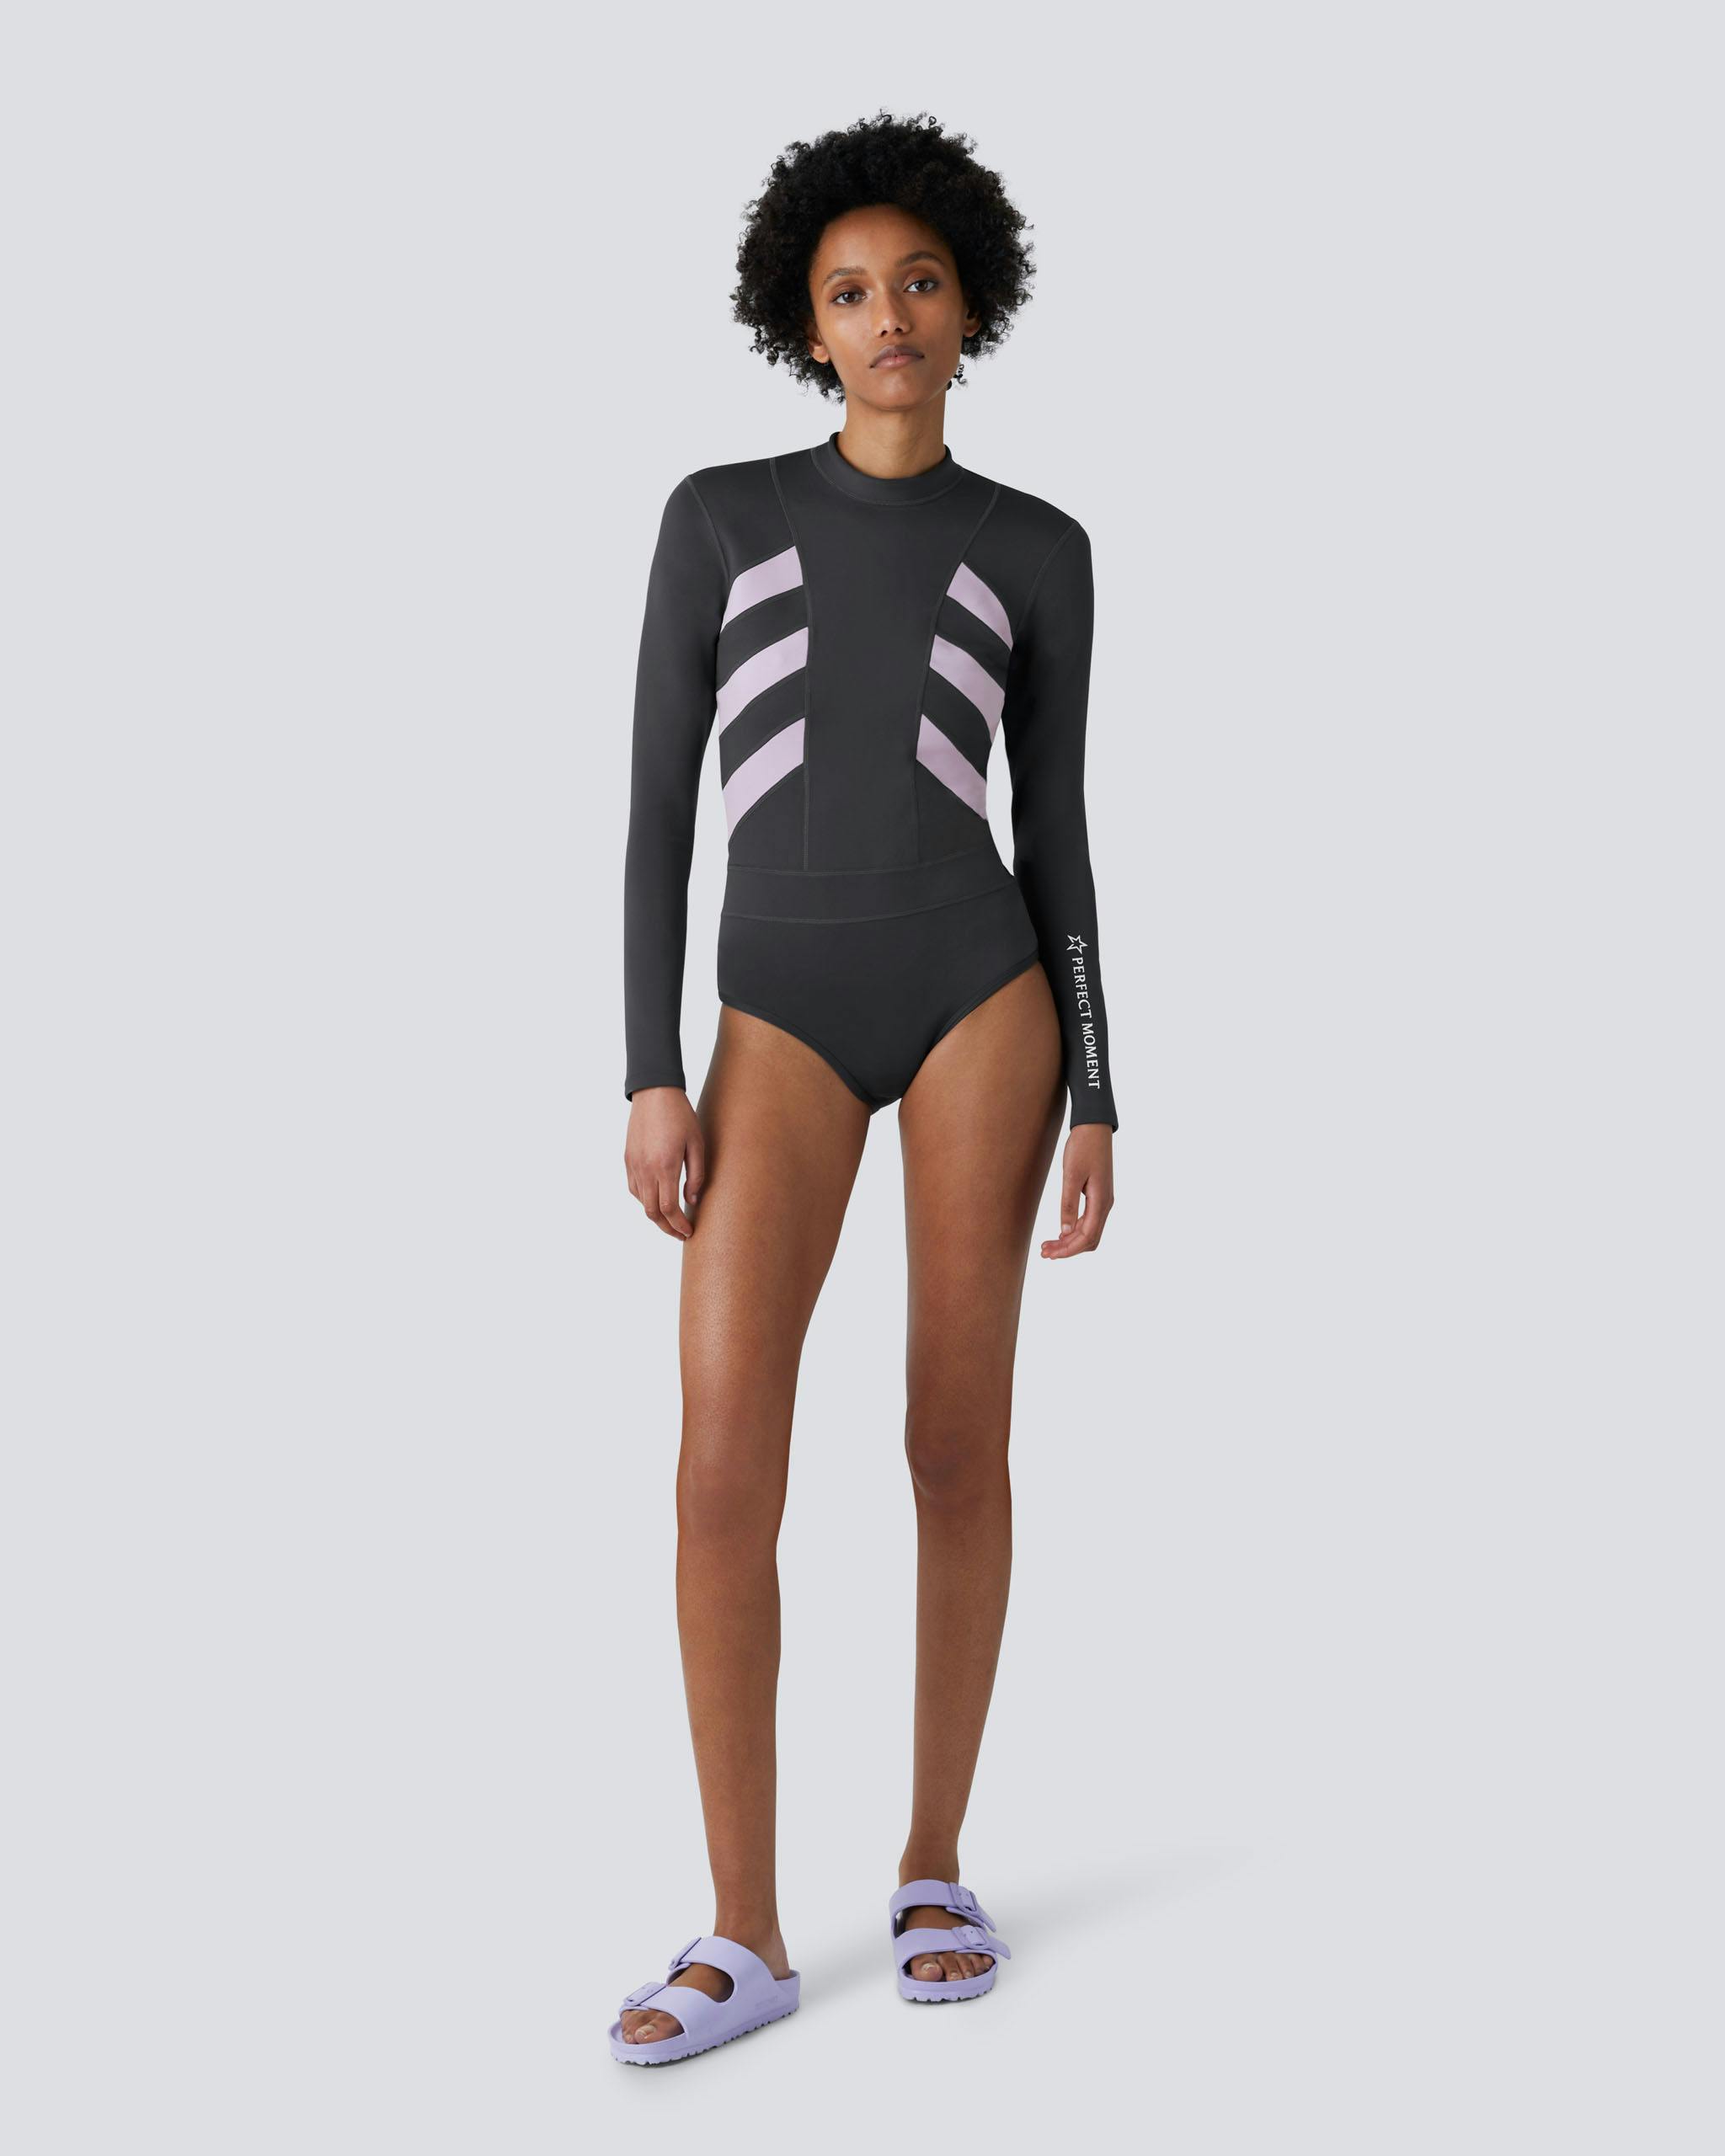 Imok Wetsuit 1